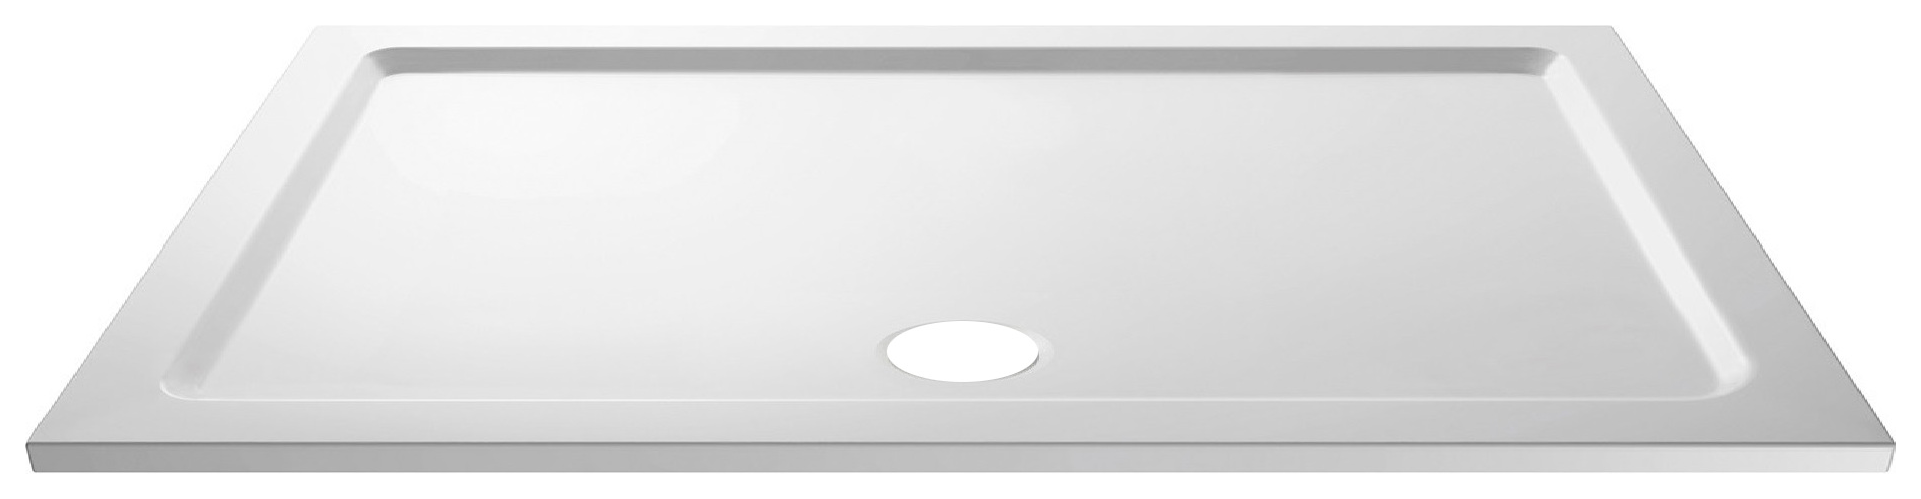 Image of Wickes 40mm Pearlstone Rectangular Shower Tray - 1700 x 700mm